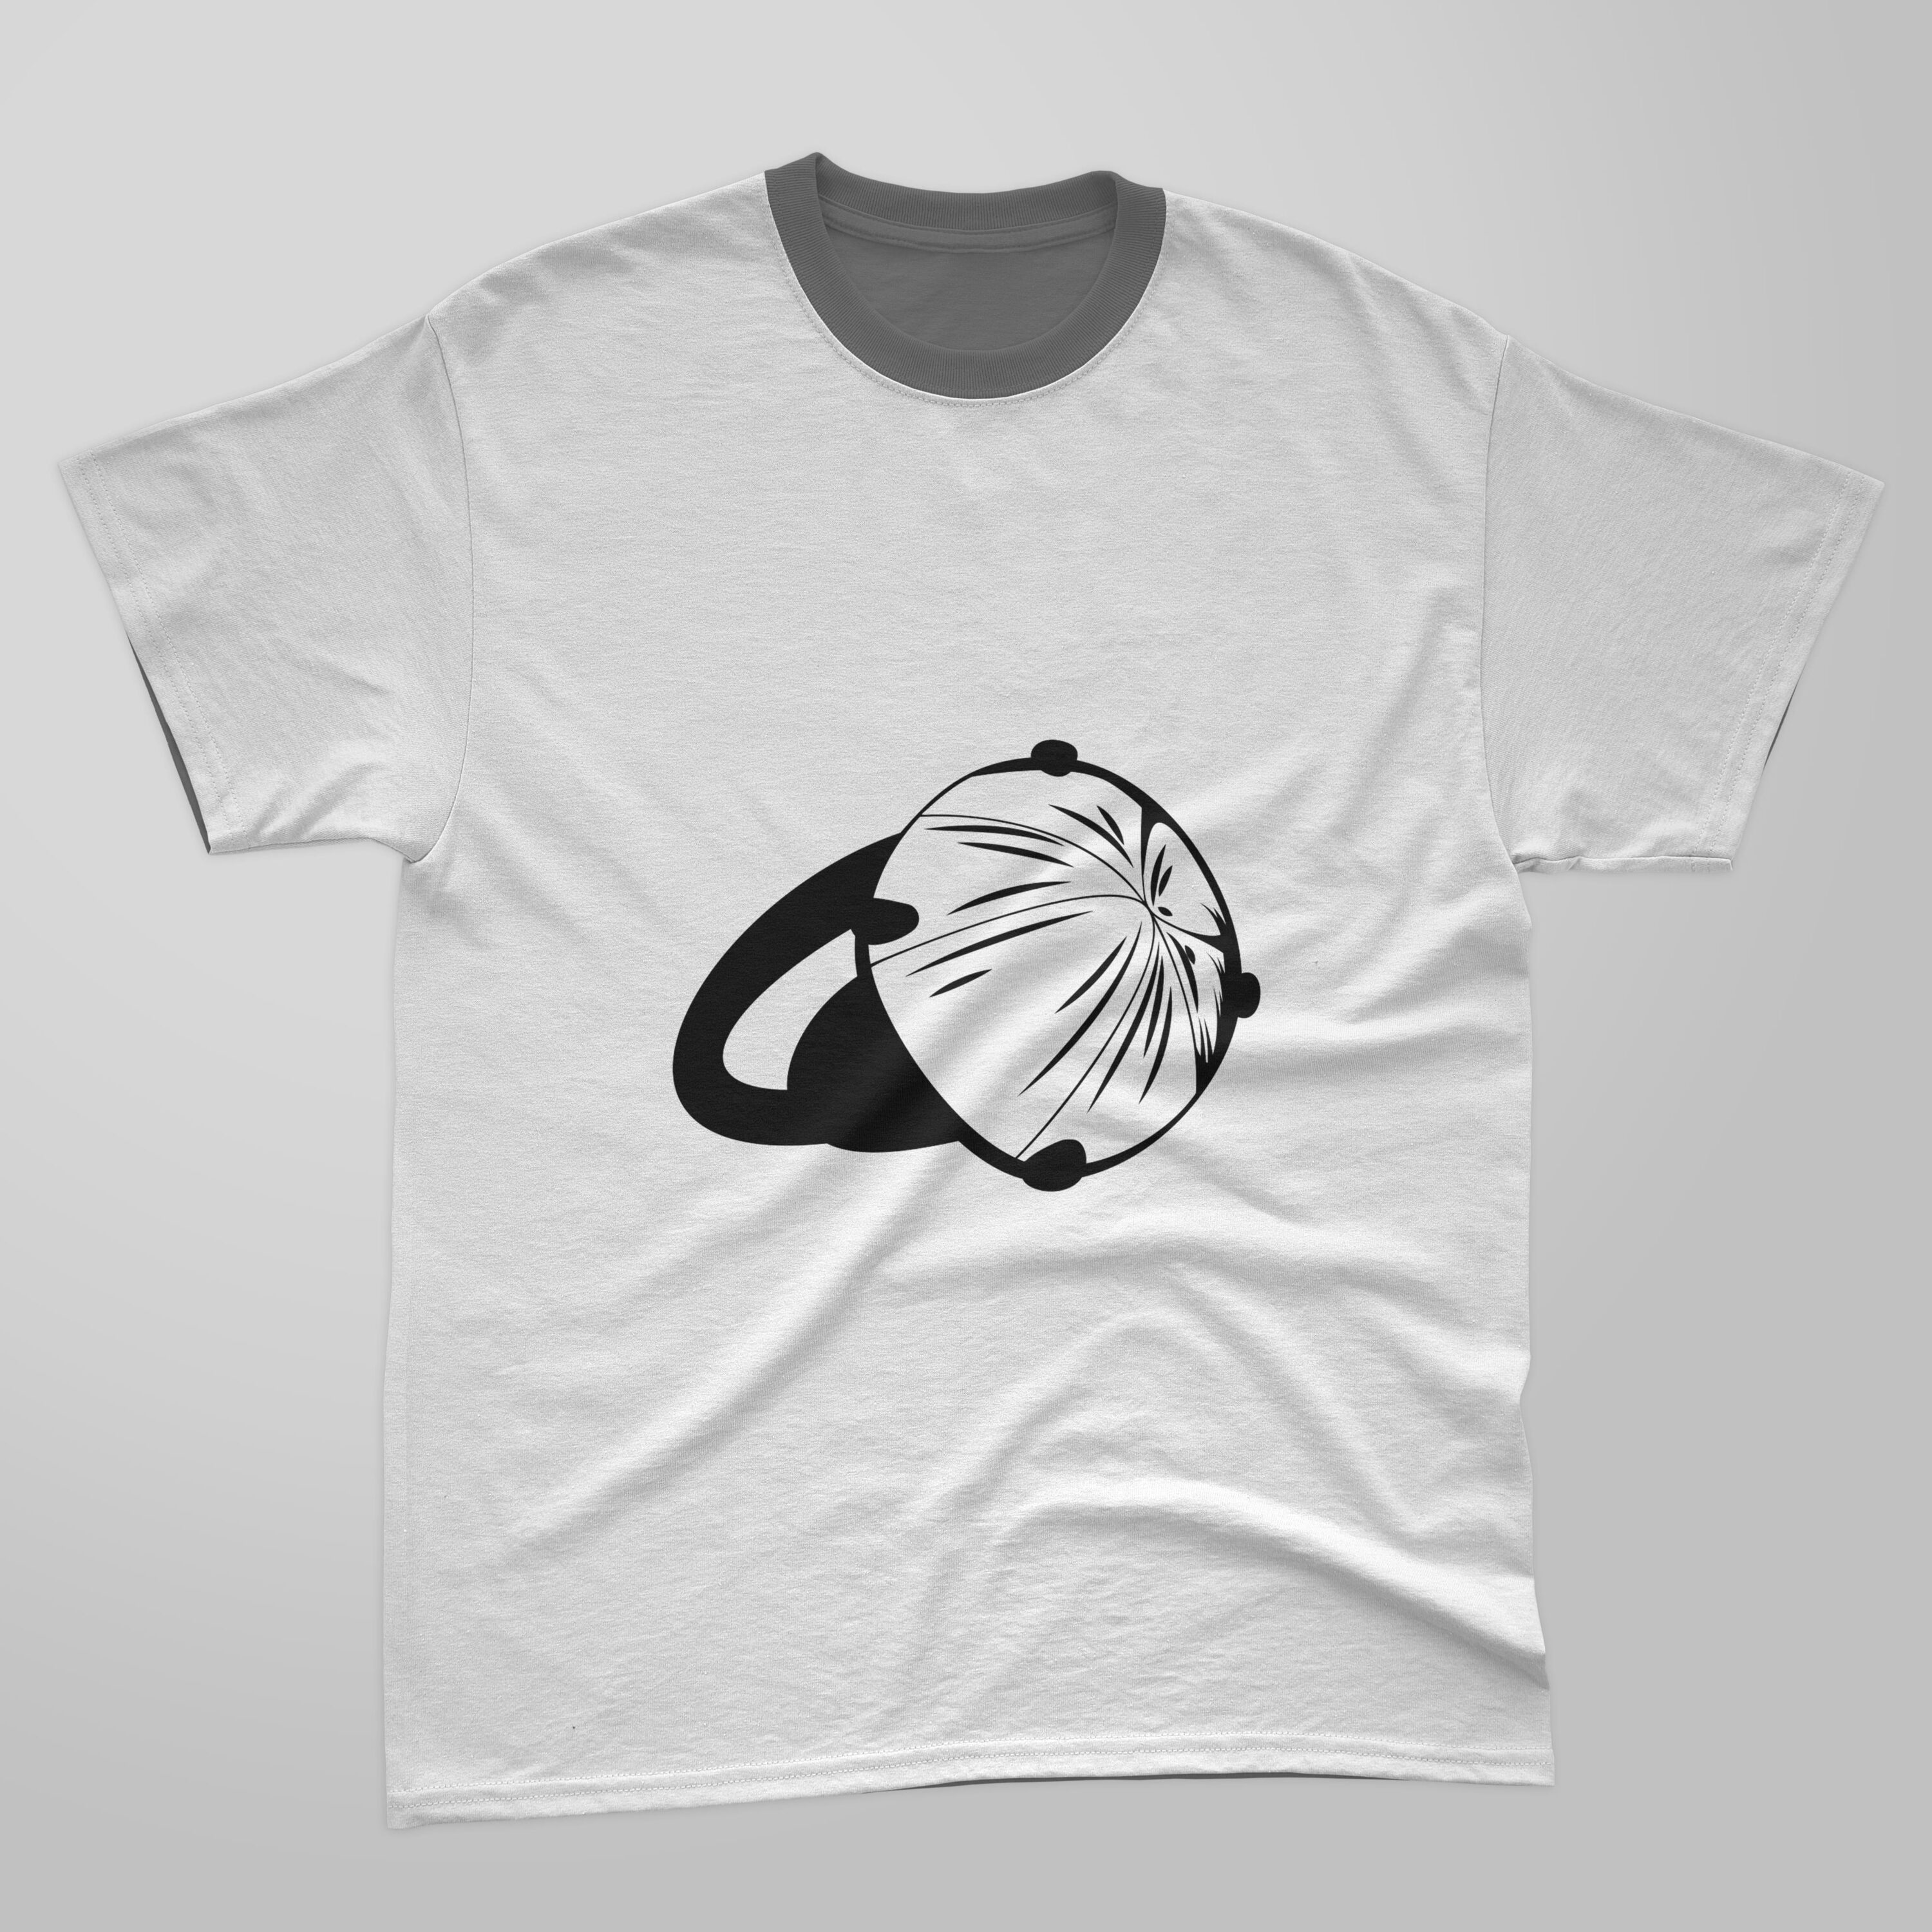 Image of t-shirt with colorful print of diamond ring silhouette.